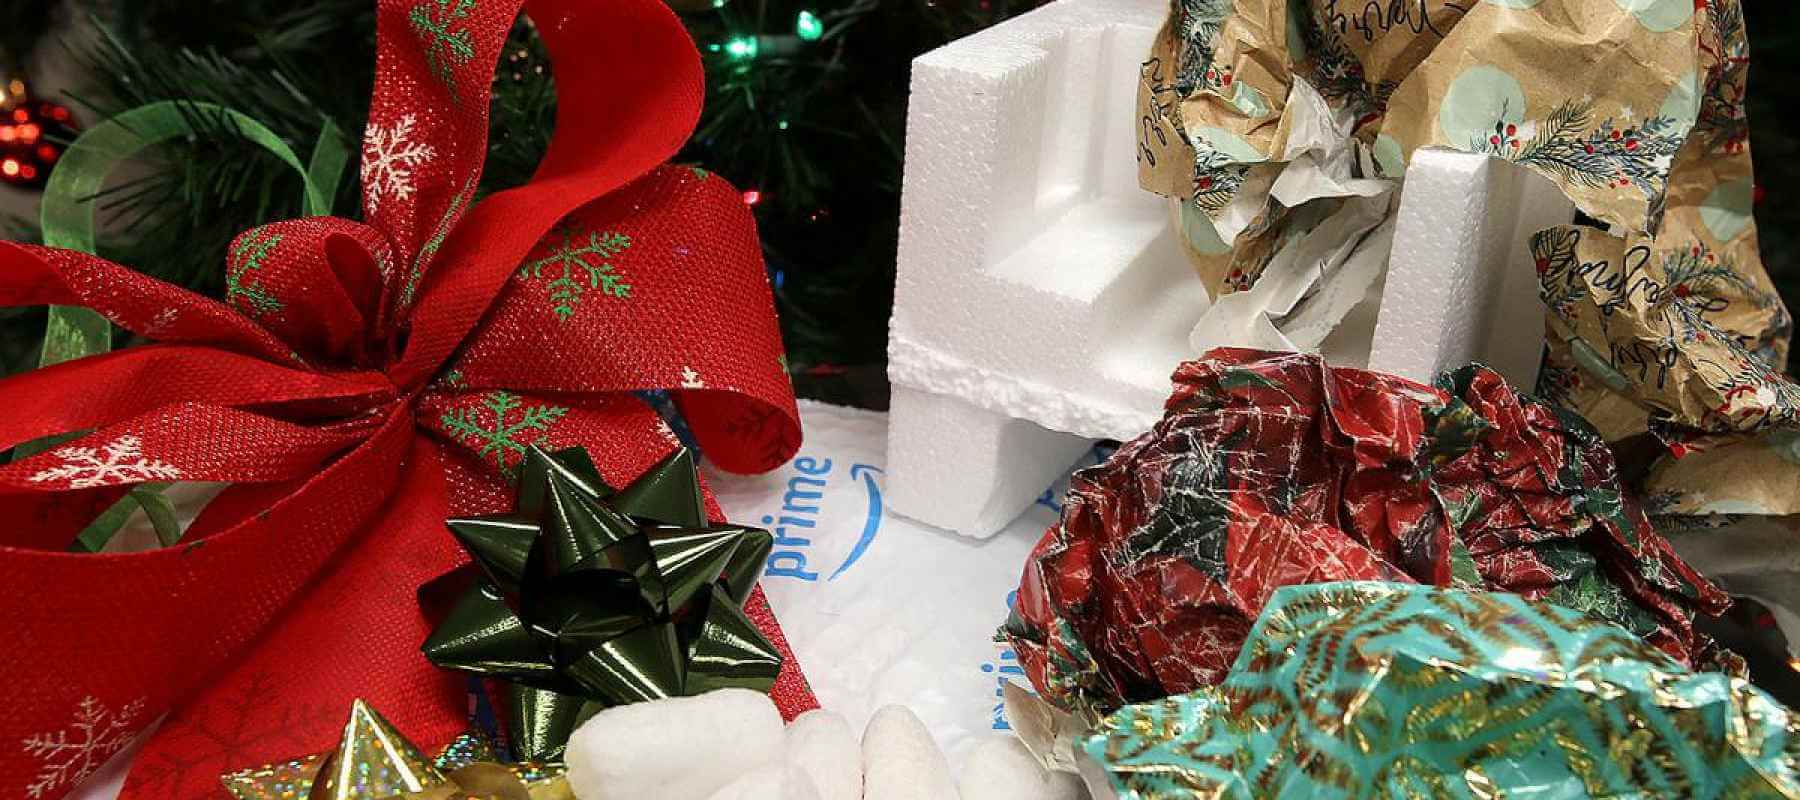 Recycling Christmas Decorations And Presents?